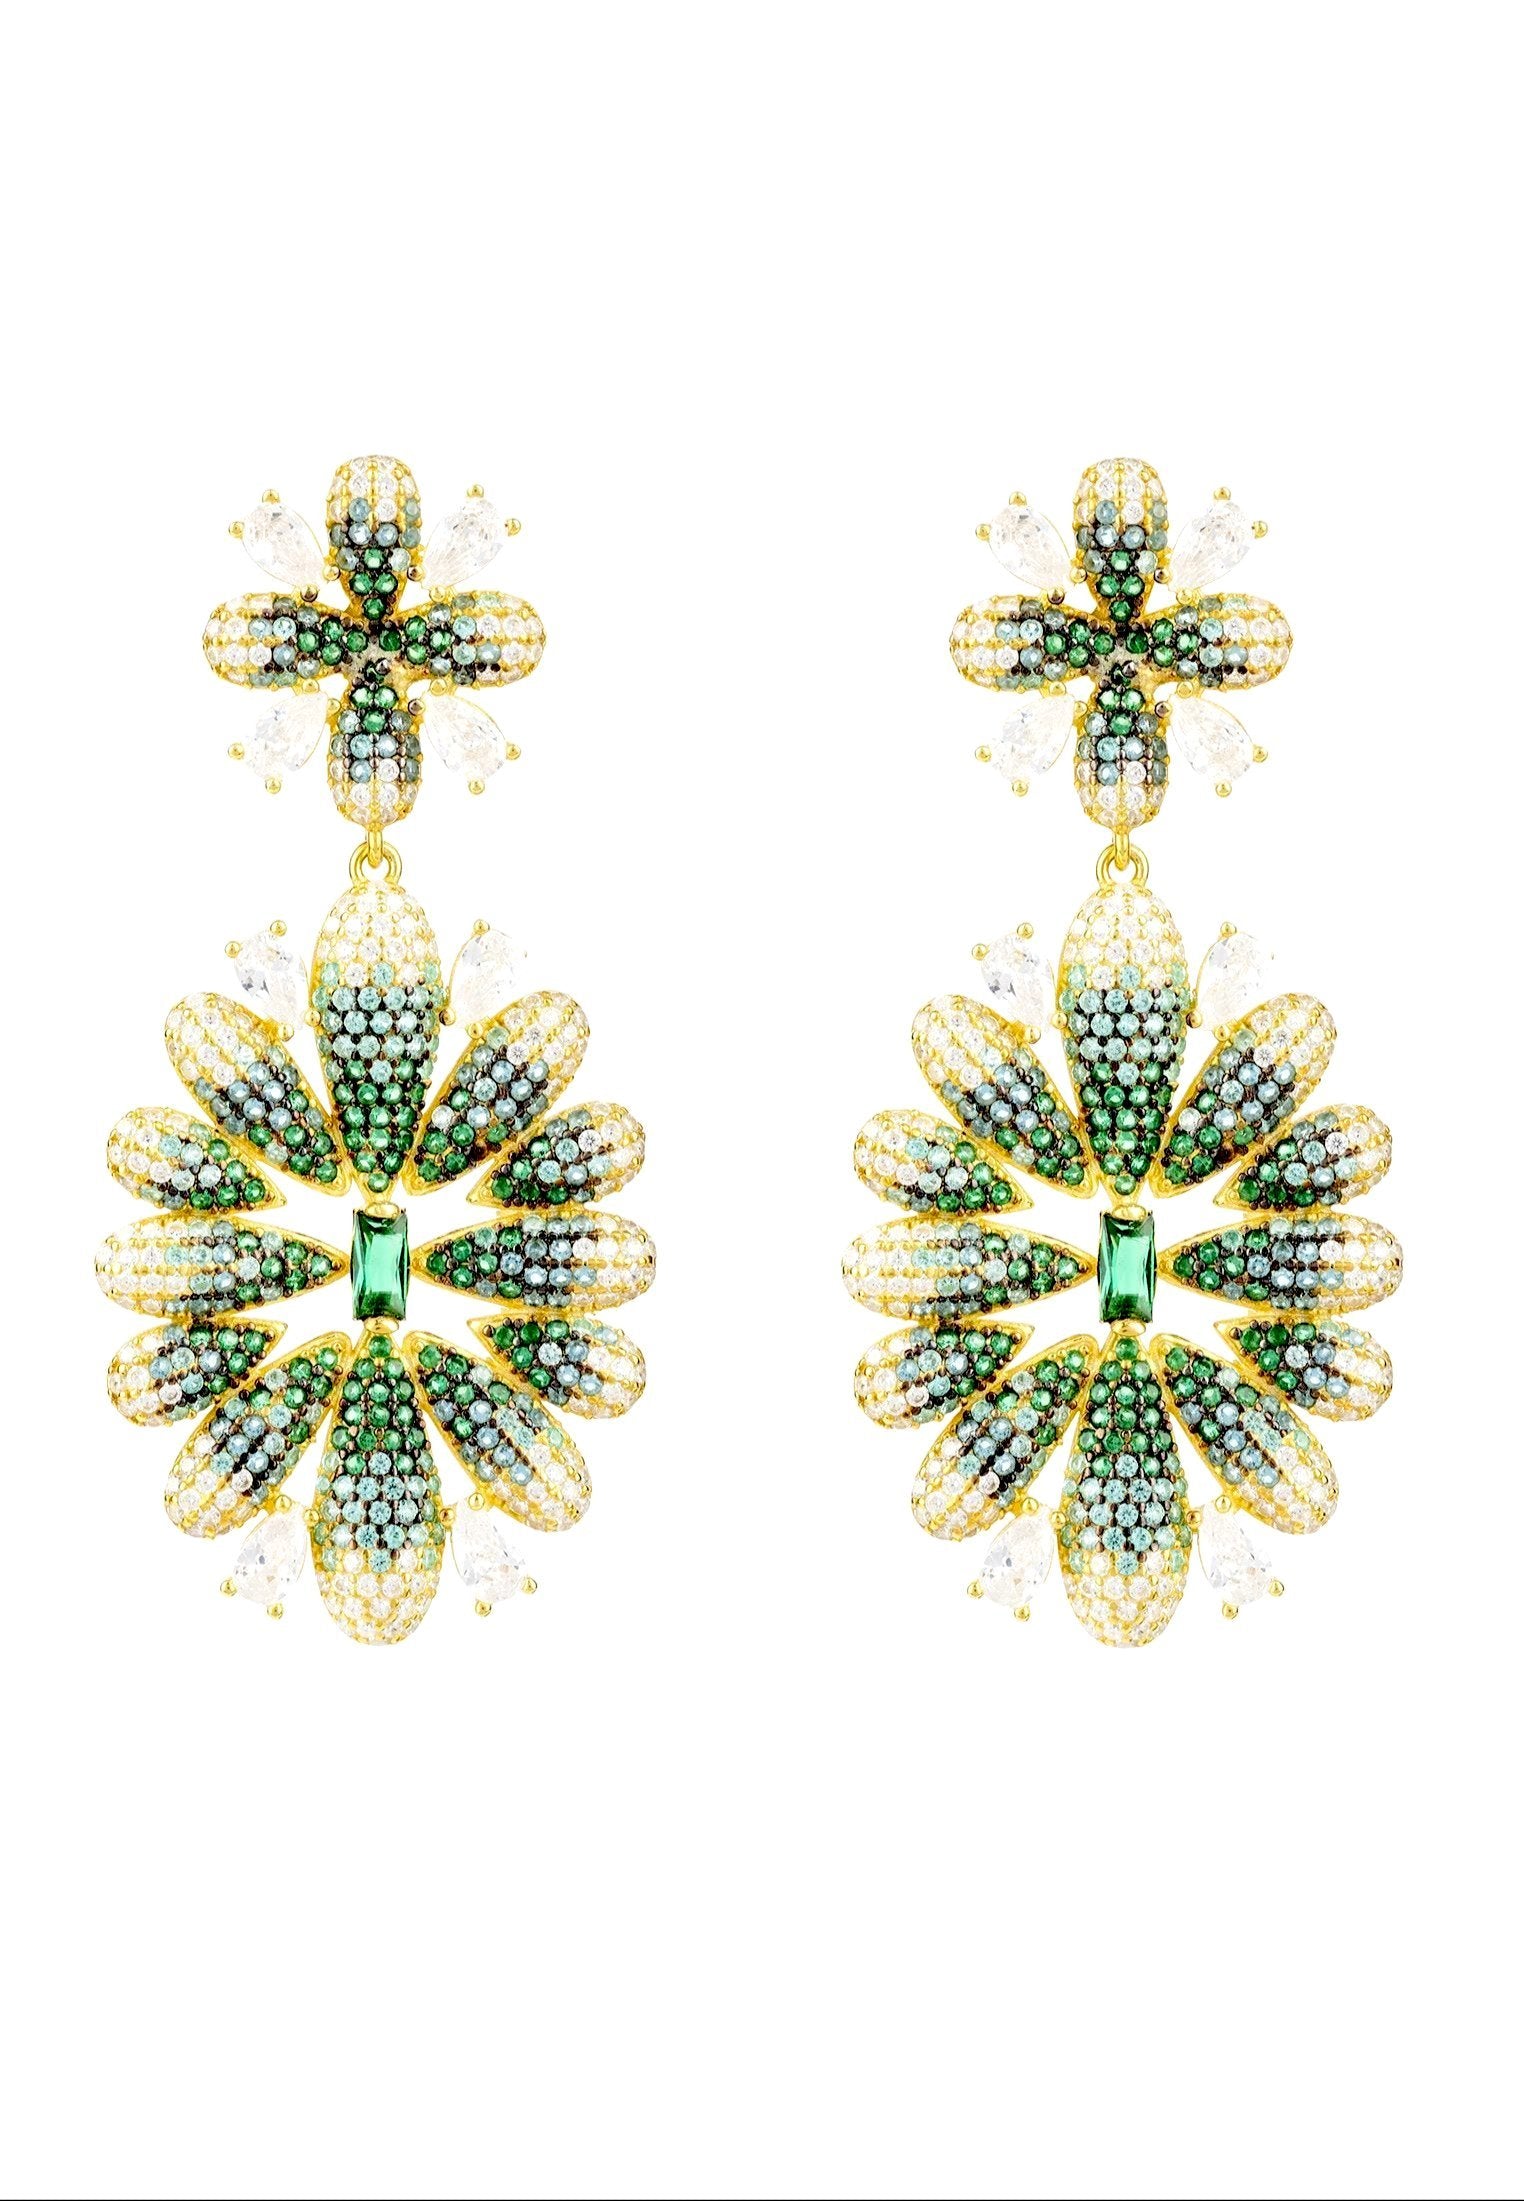 Luxurious Babylon Flower Statement Earrings in Gold and Green Gemstones - Perfect for Bridal and Evening Wear - Jewelry & Watches - Bijou Her -  -  - 